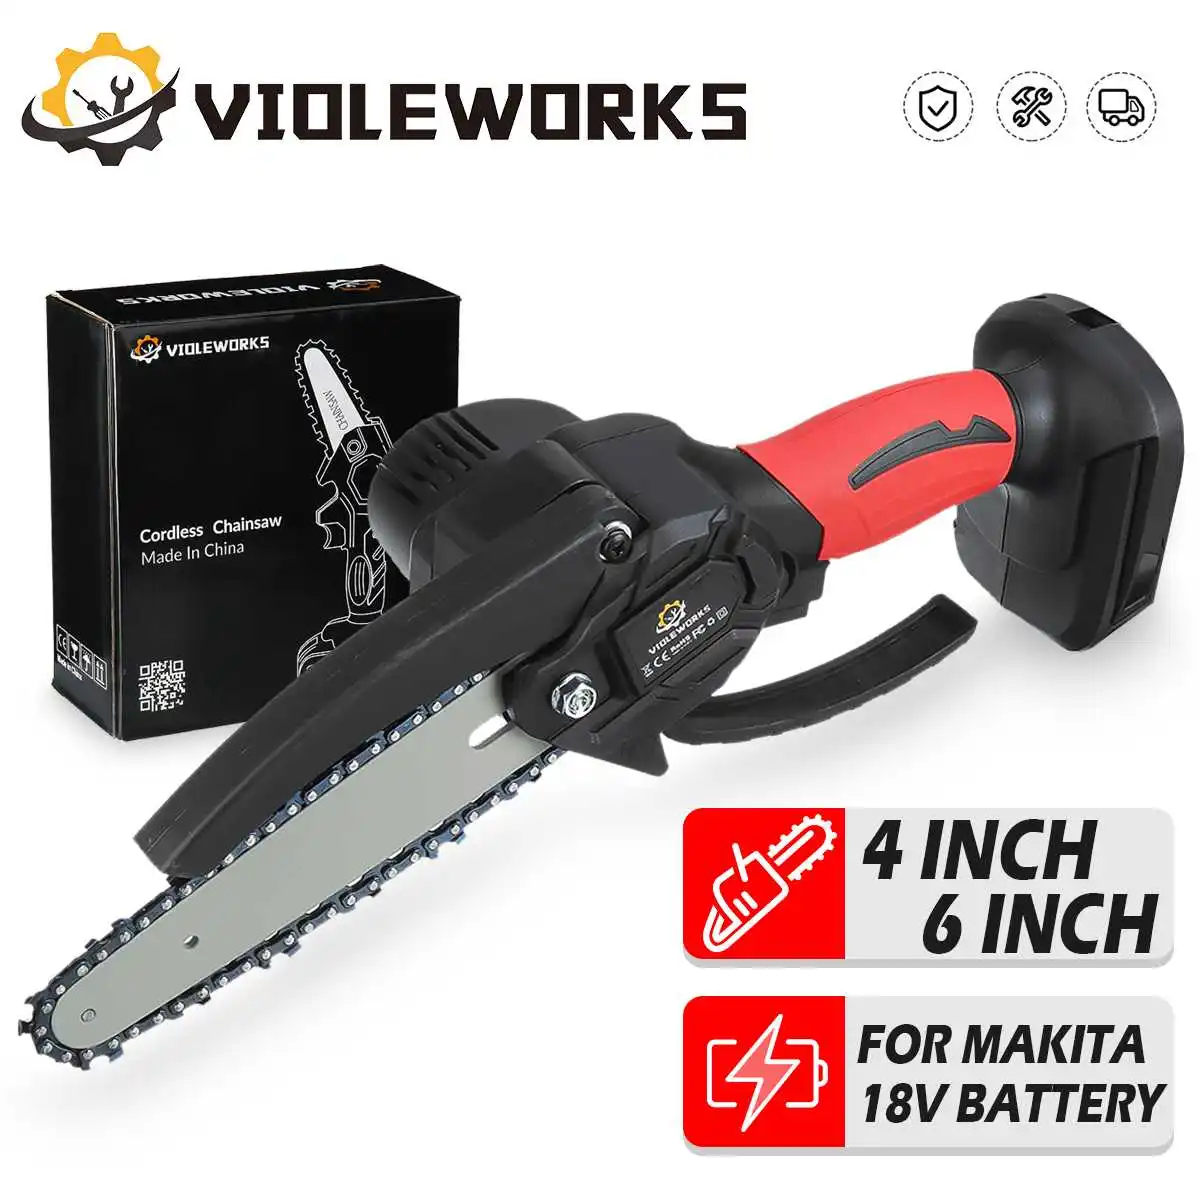 

4/6 Inch Electric Saw Chainsaw 18V 1200W without Battery Only Saw Body Woodworking Cutter Pruning Tool for Makita 18V Battery